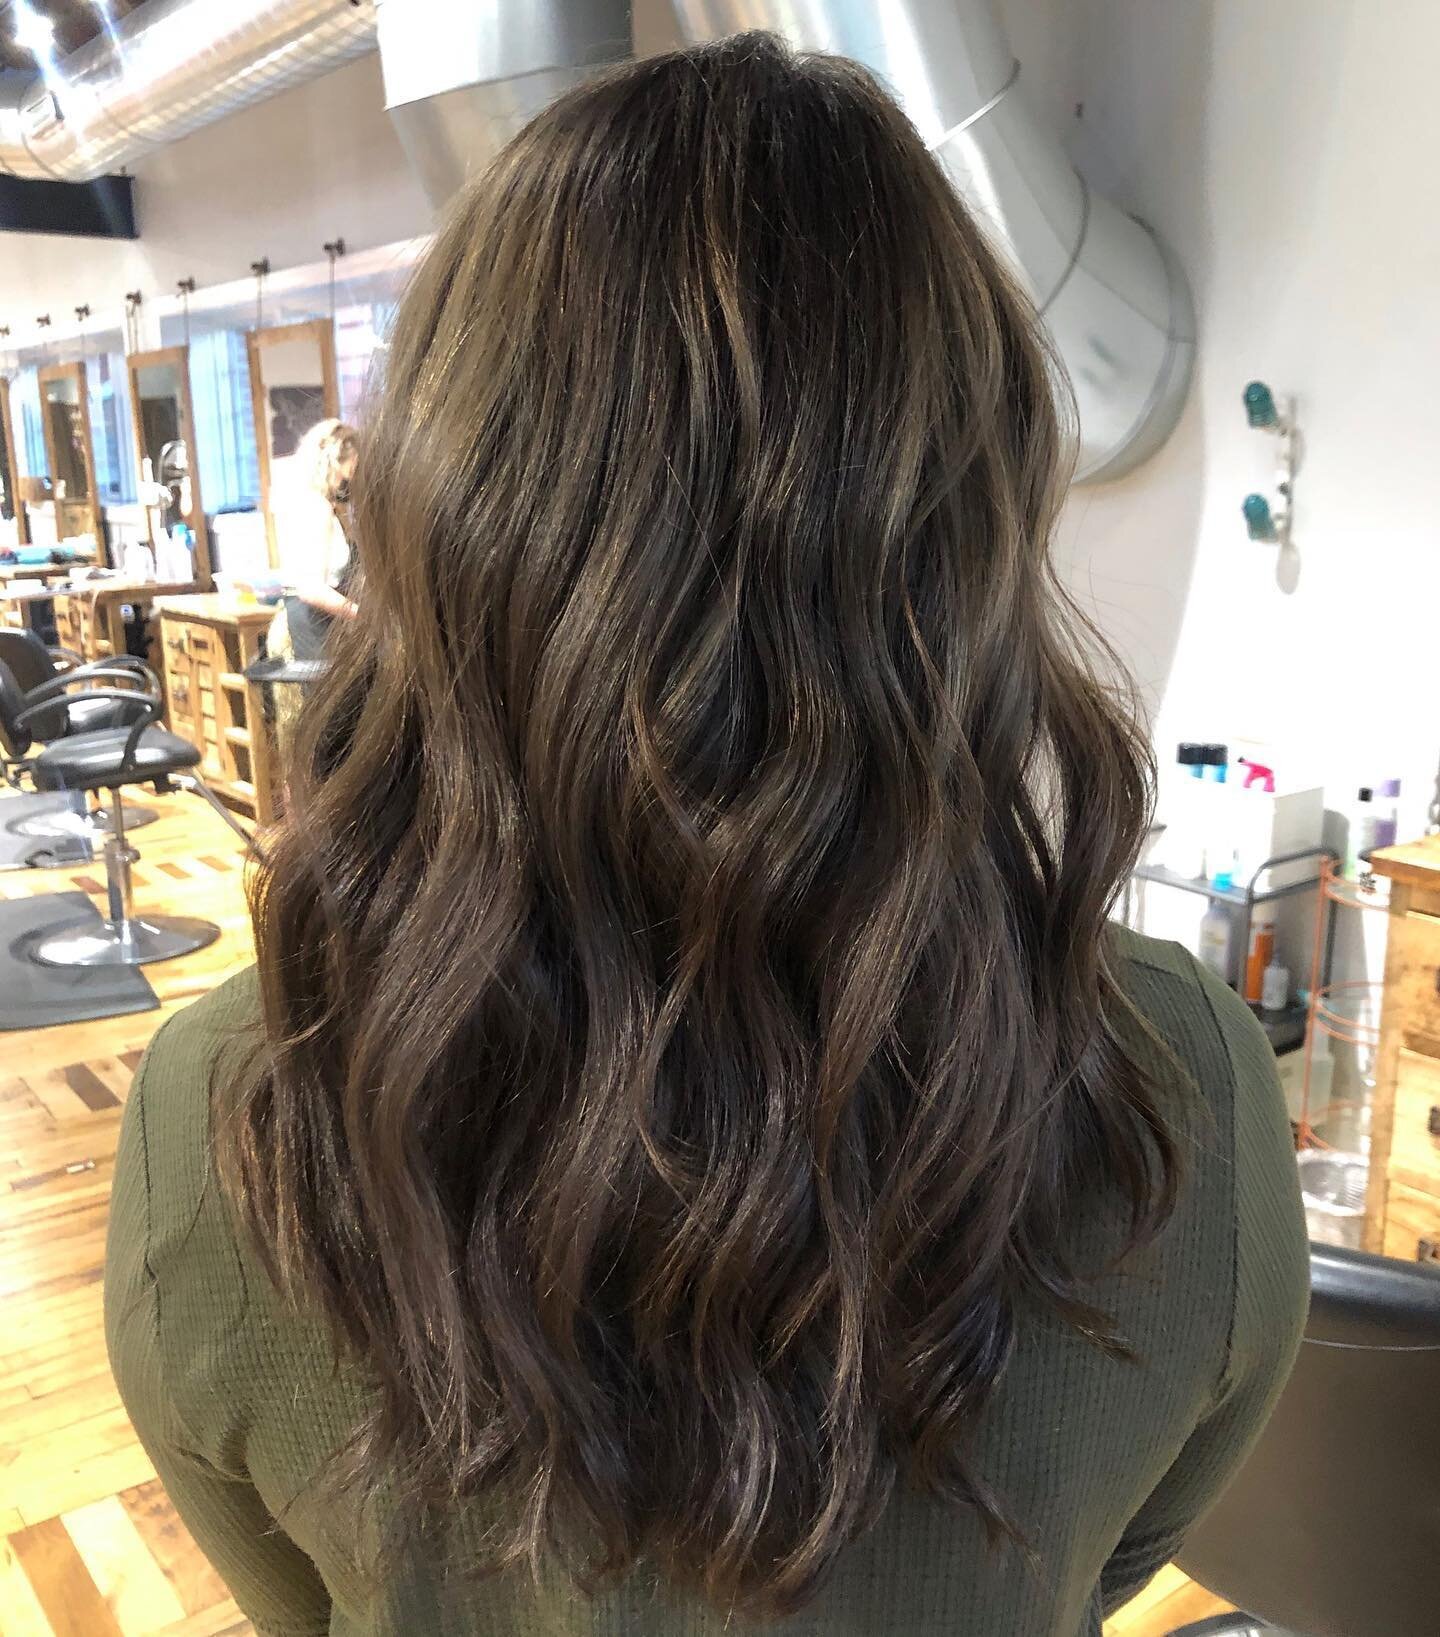 Cool, Ash, Dimensional Balayage. I loved how this look turned out and gave her some beautiful highlights without overpowering her original color. ❤